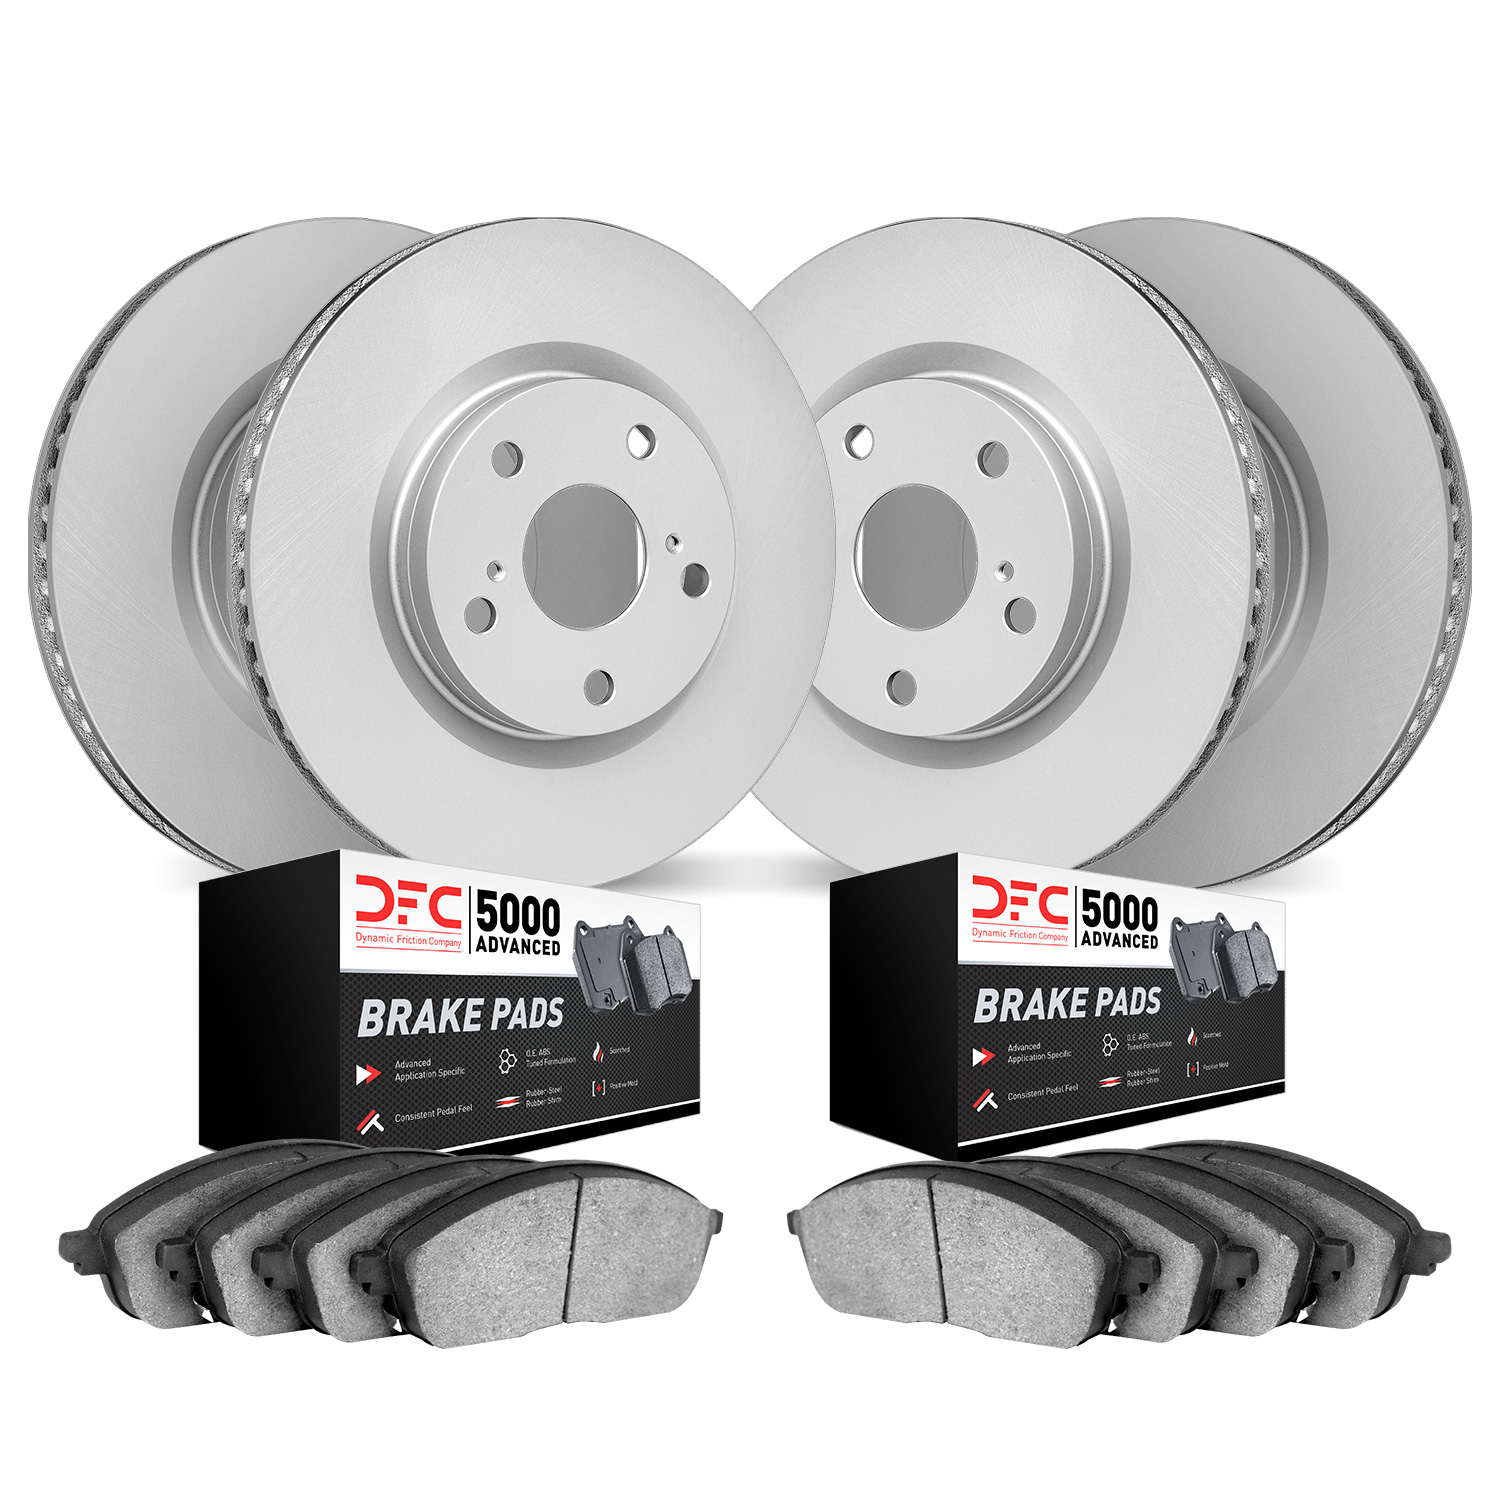 4504-54064 Geospec Brake Rotors w/5000 Advanced Brake Pads Kit, 2007-2008 Ford/Lincoln/Mercury/Mazda, Position: Front and Rear